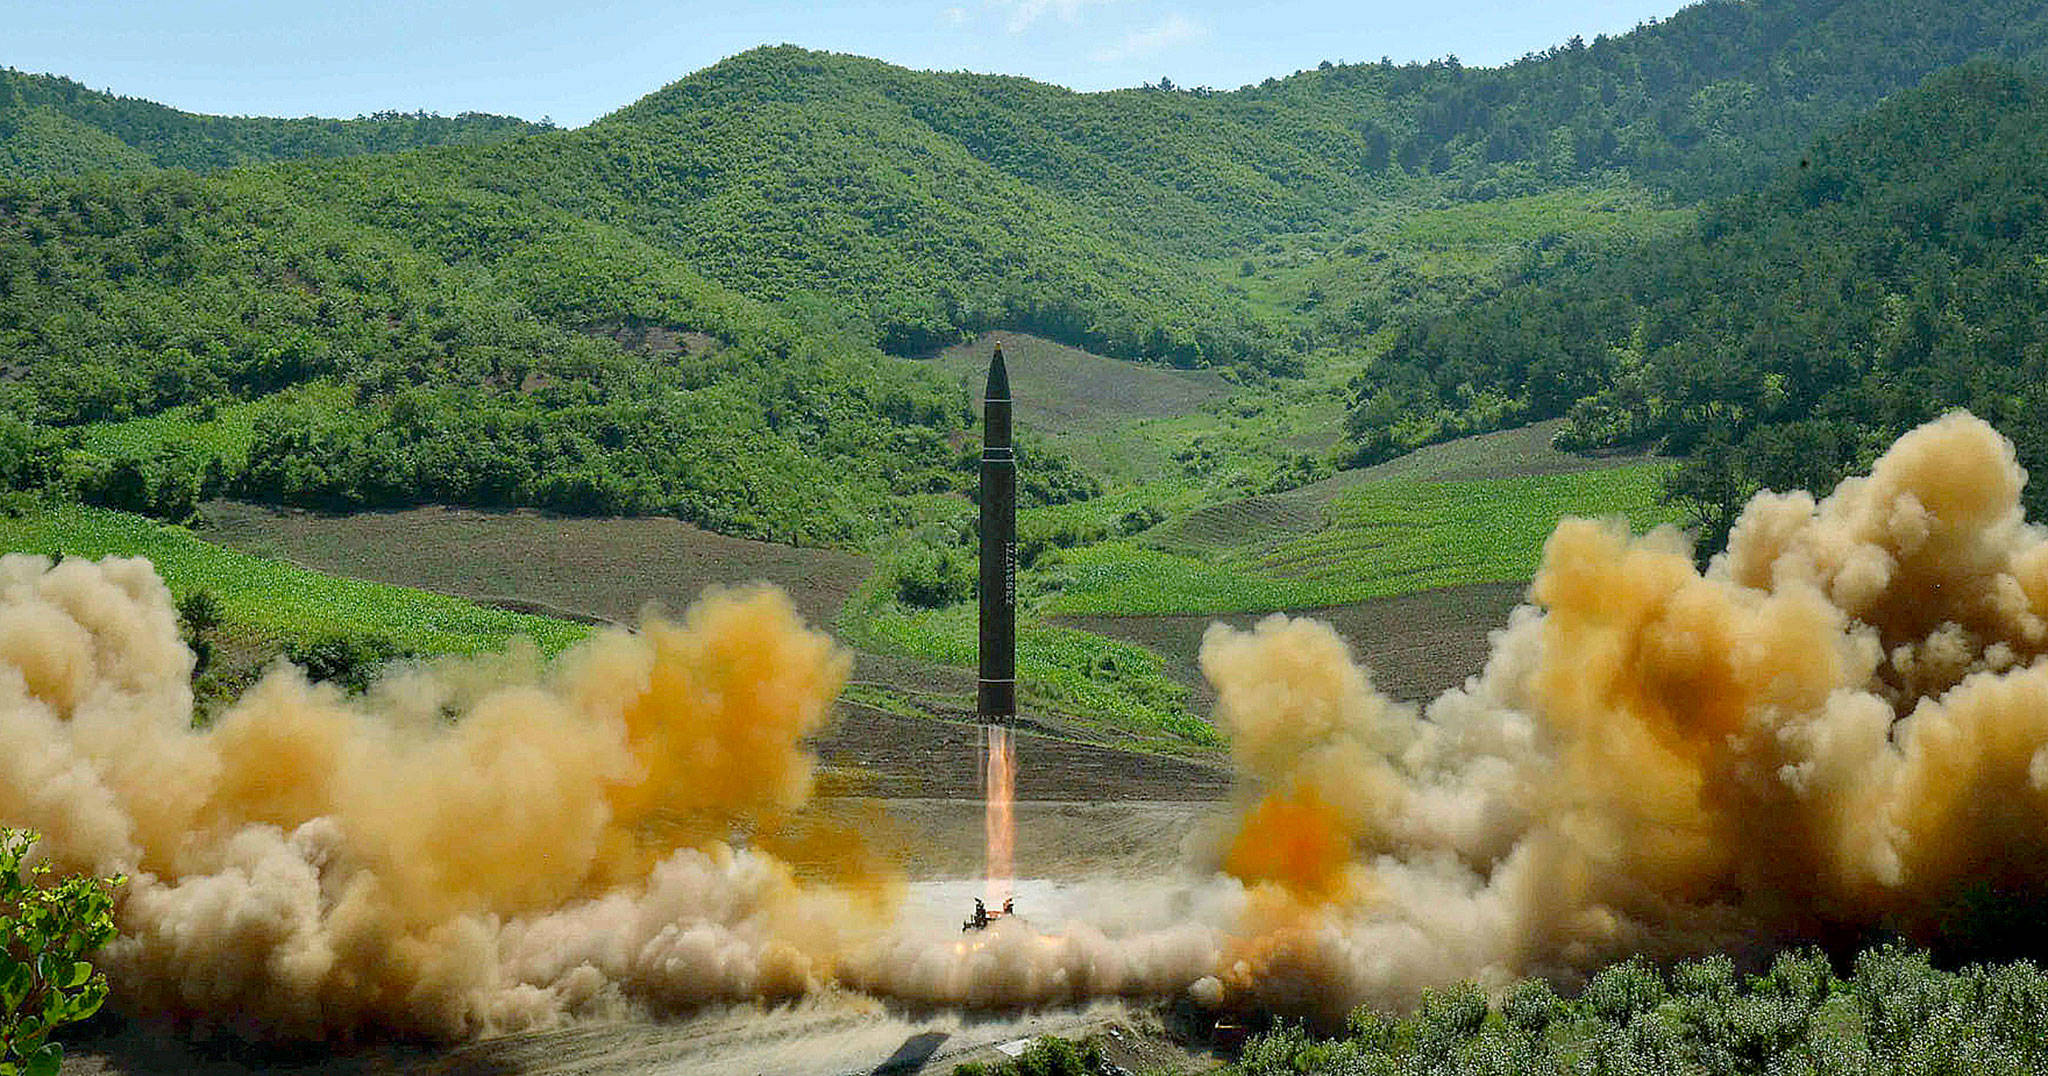 This photo distributed by the North Korean government shows what was said to be the launch of a Hwasong-14 intercontinental ballistic missile in North Korea’s northwest, on Tuesday. Independent journalists were not given access to cover the event depicted in this photo. (Korean Central News Agency/Korea News Service via AP)